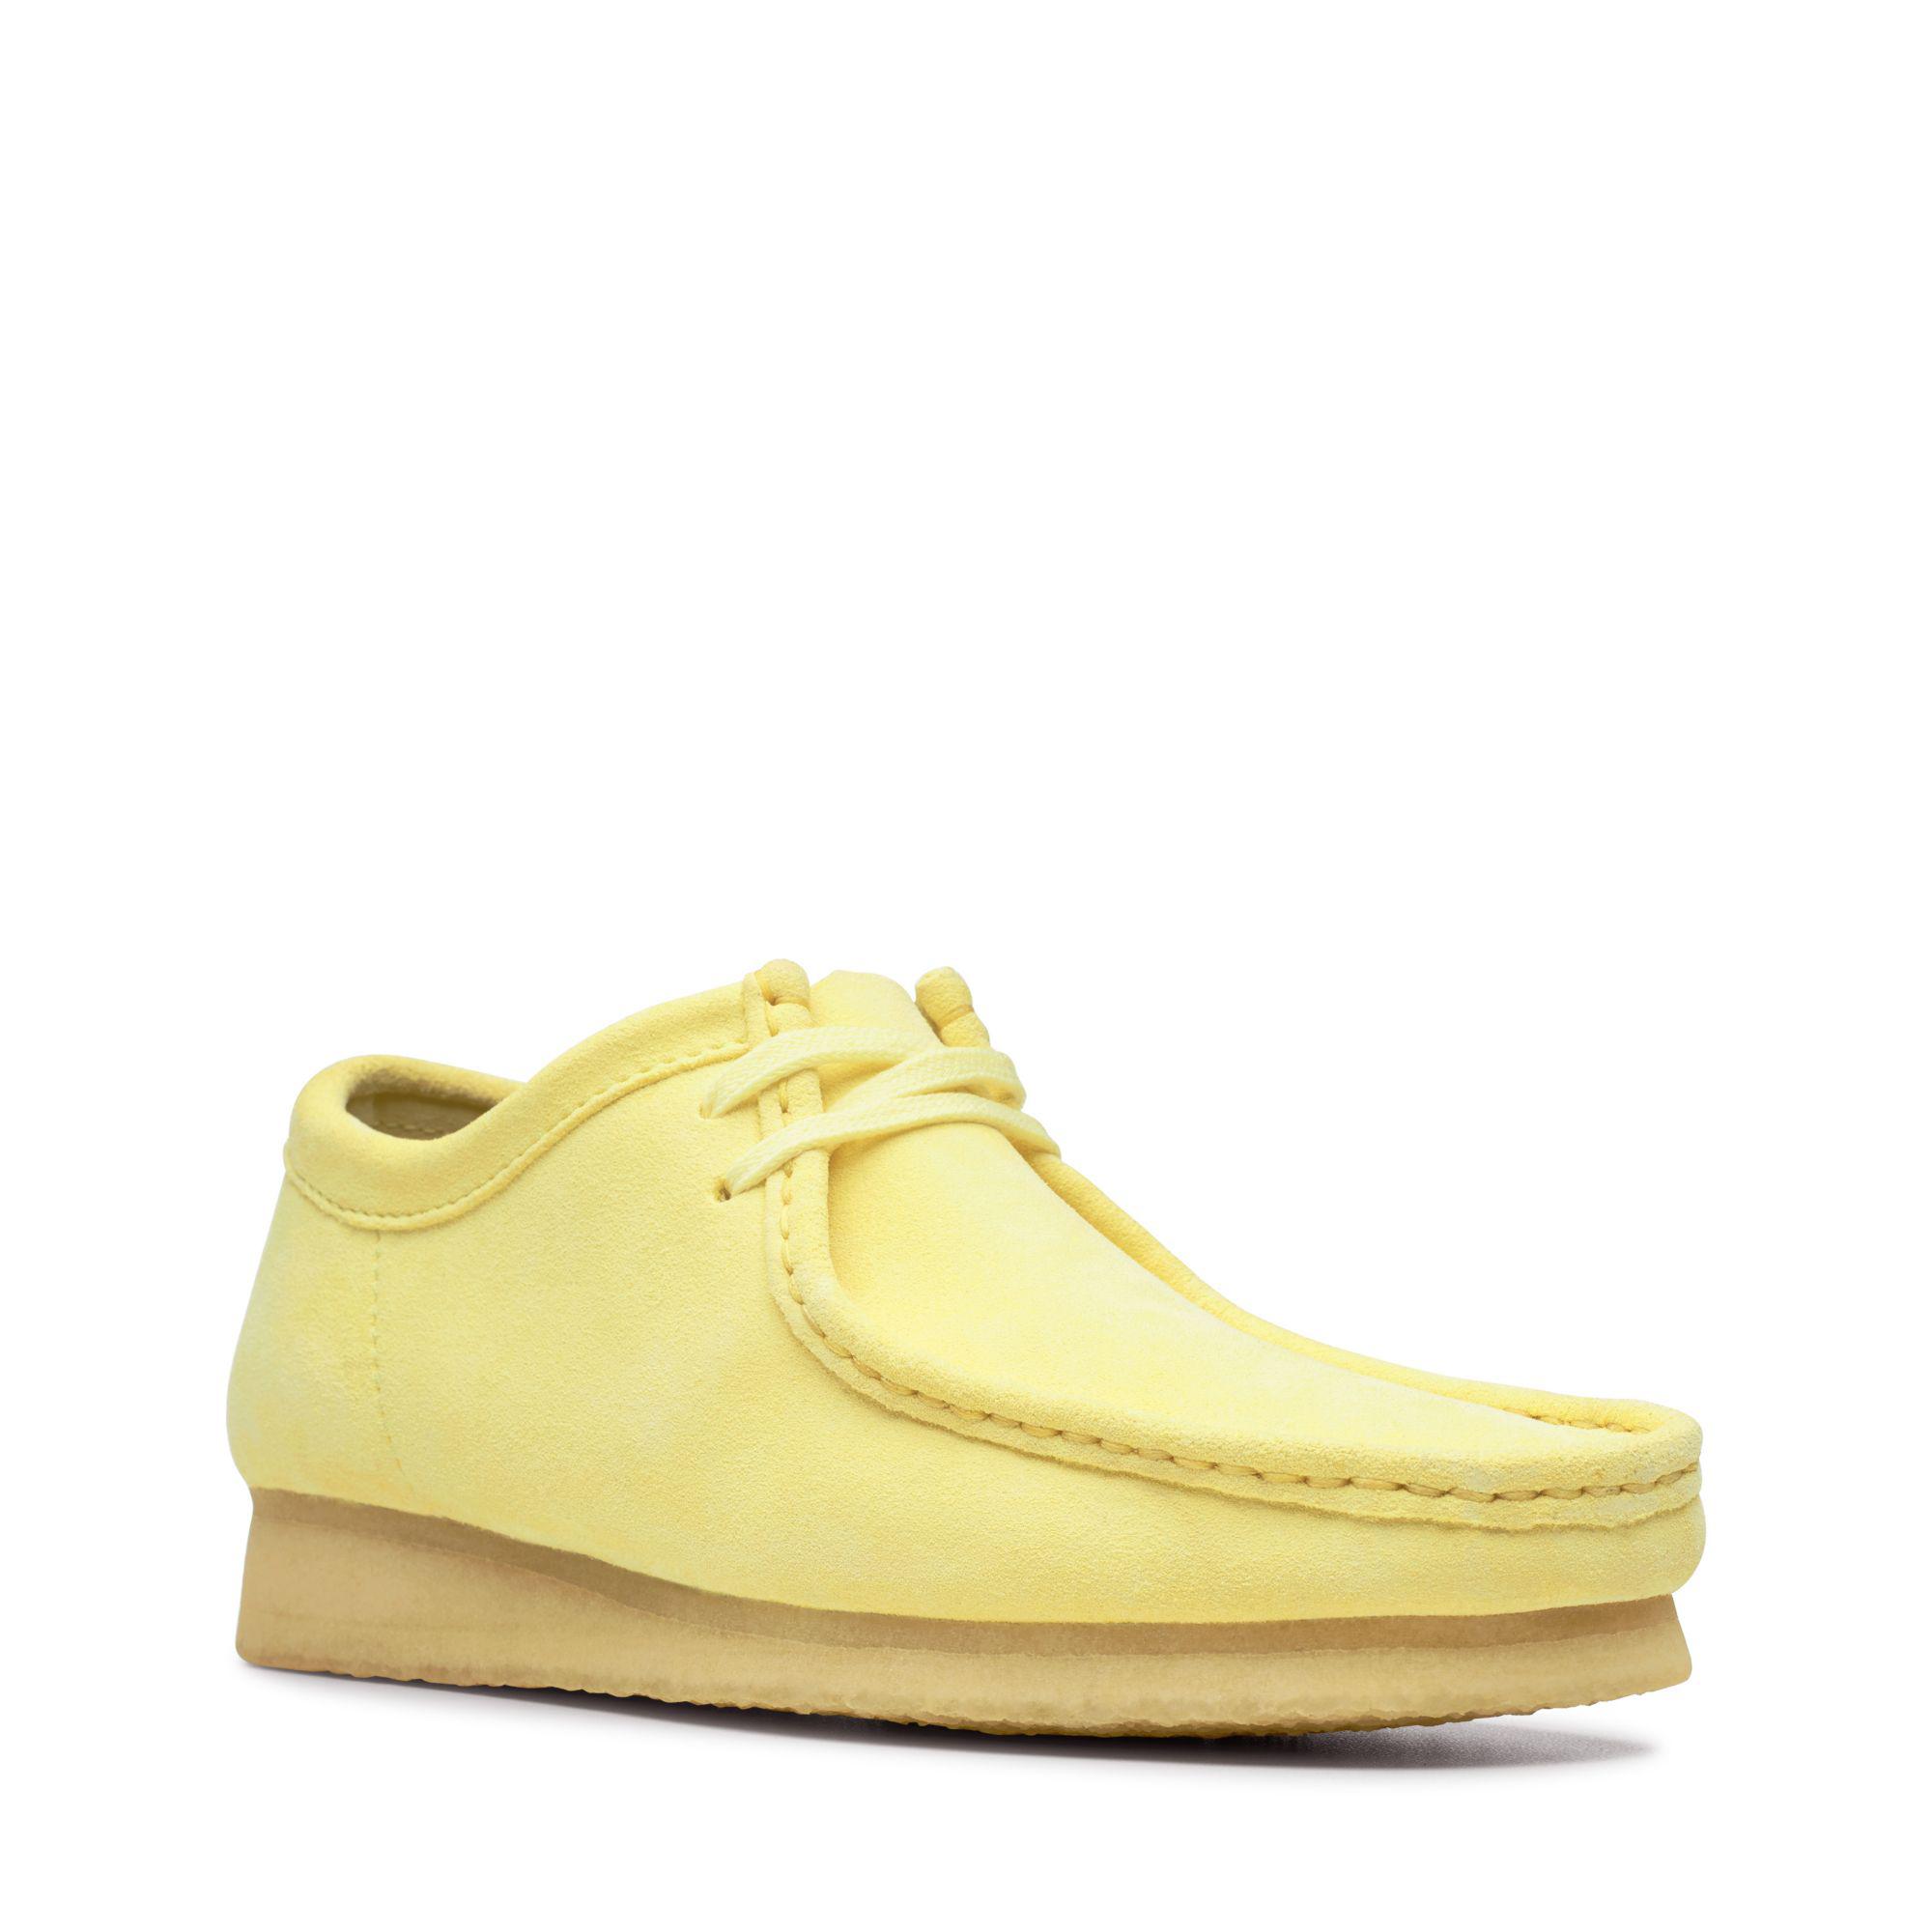 Clarks Suede Wallabee in Pale Yellow (Yellow) for Men - Lyst